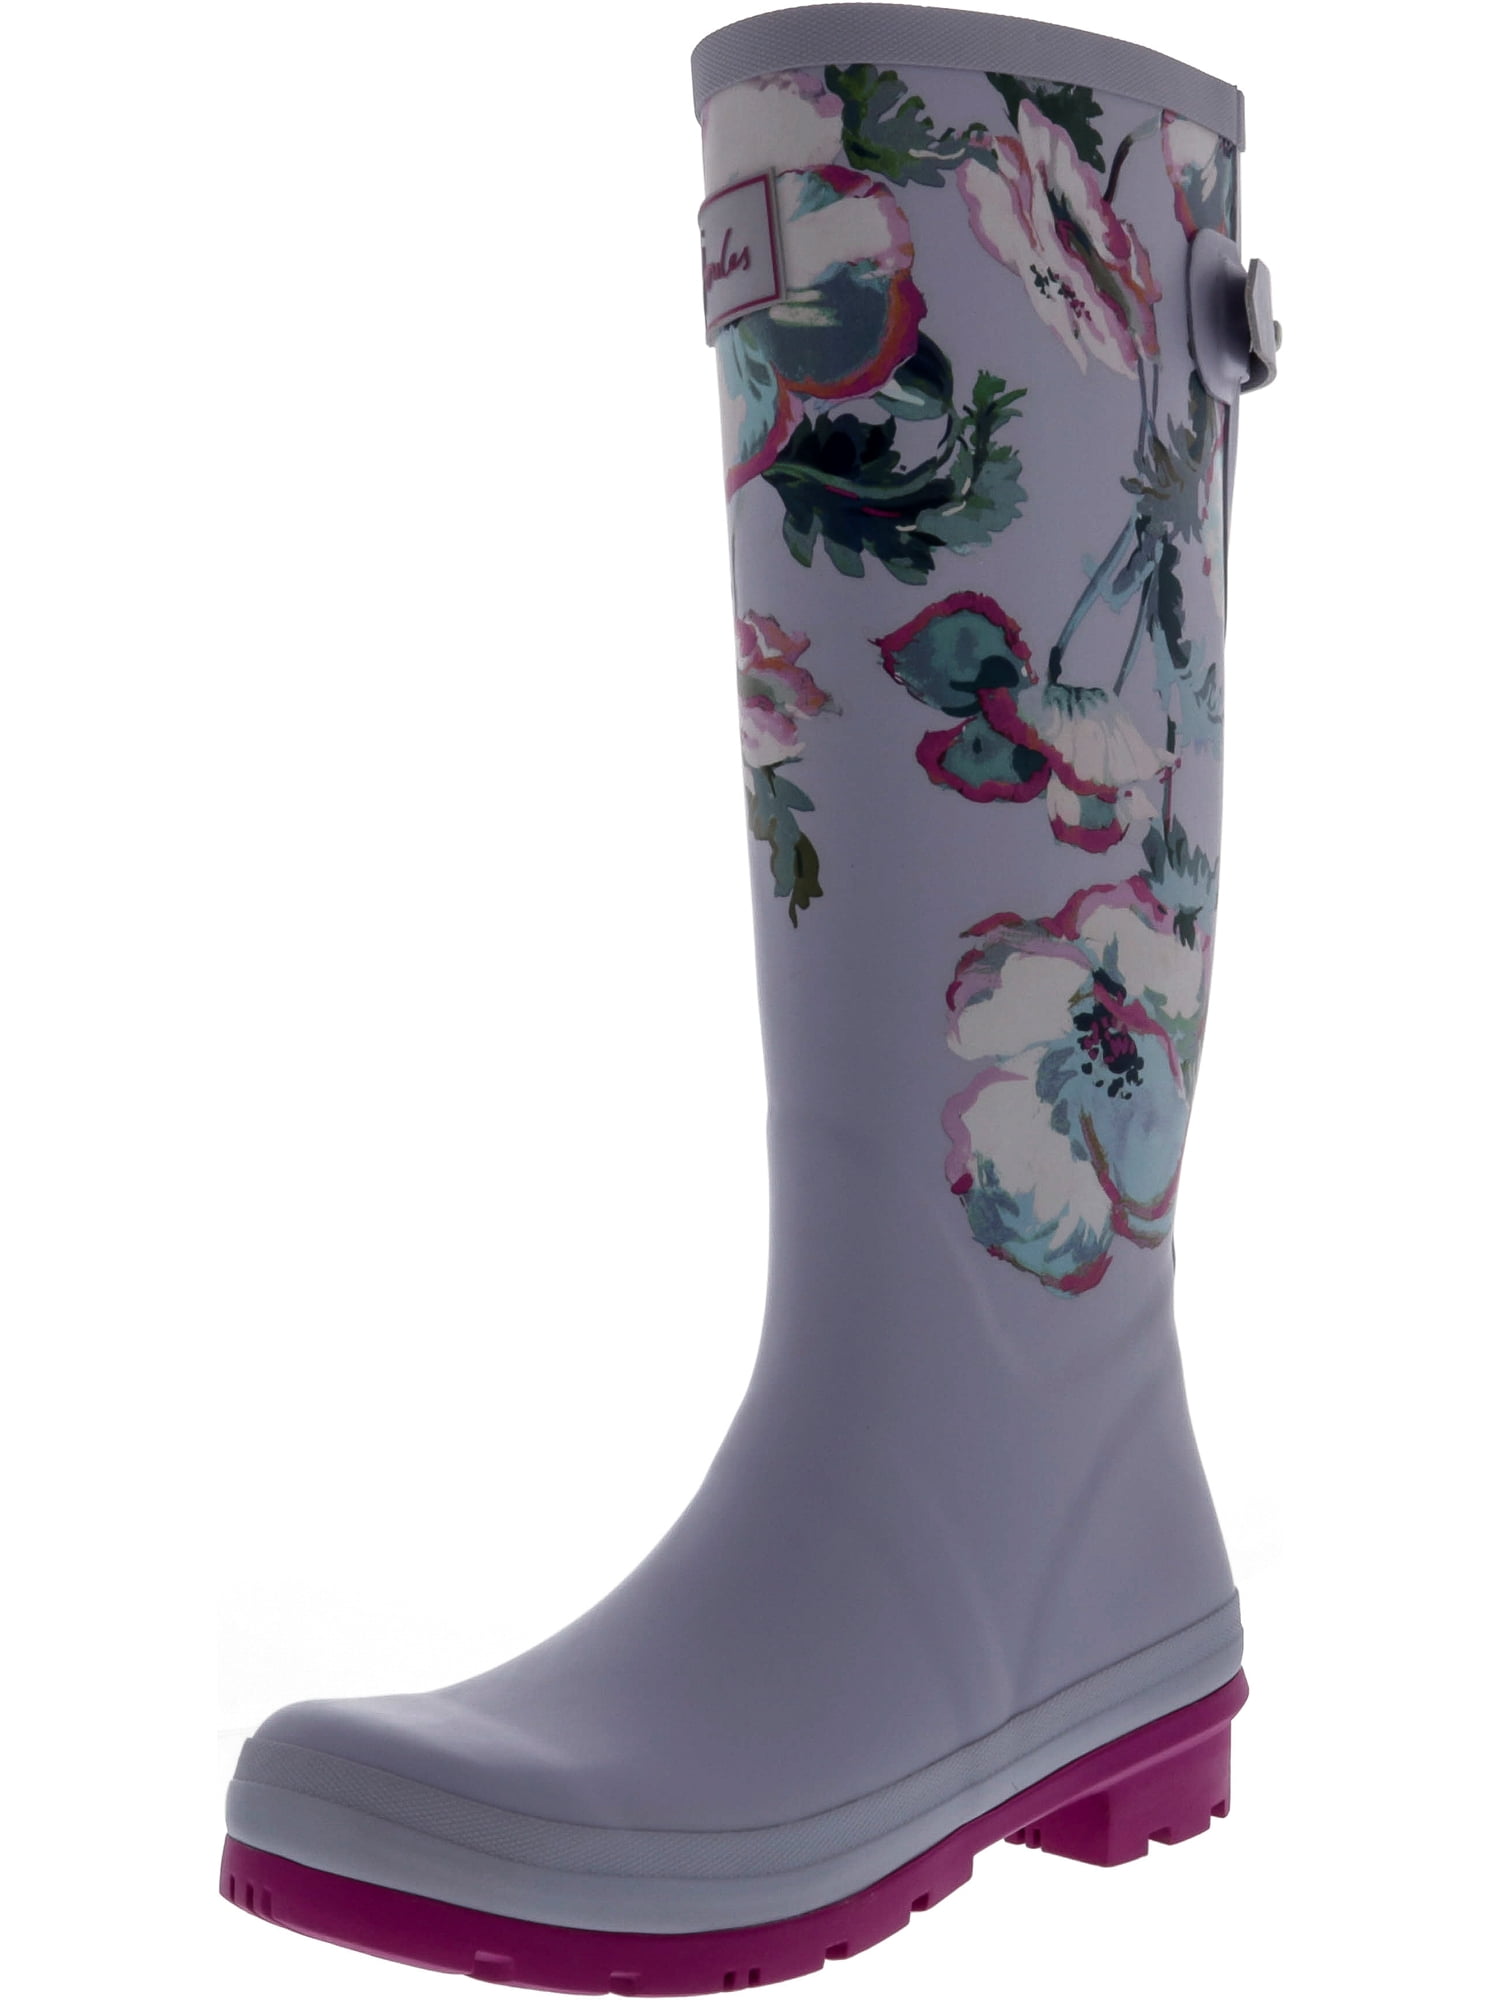 French Navy Fay Floral Joules Welly Print Boots SALE 40% OFF